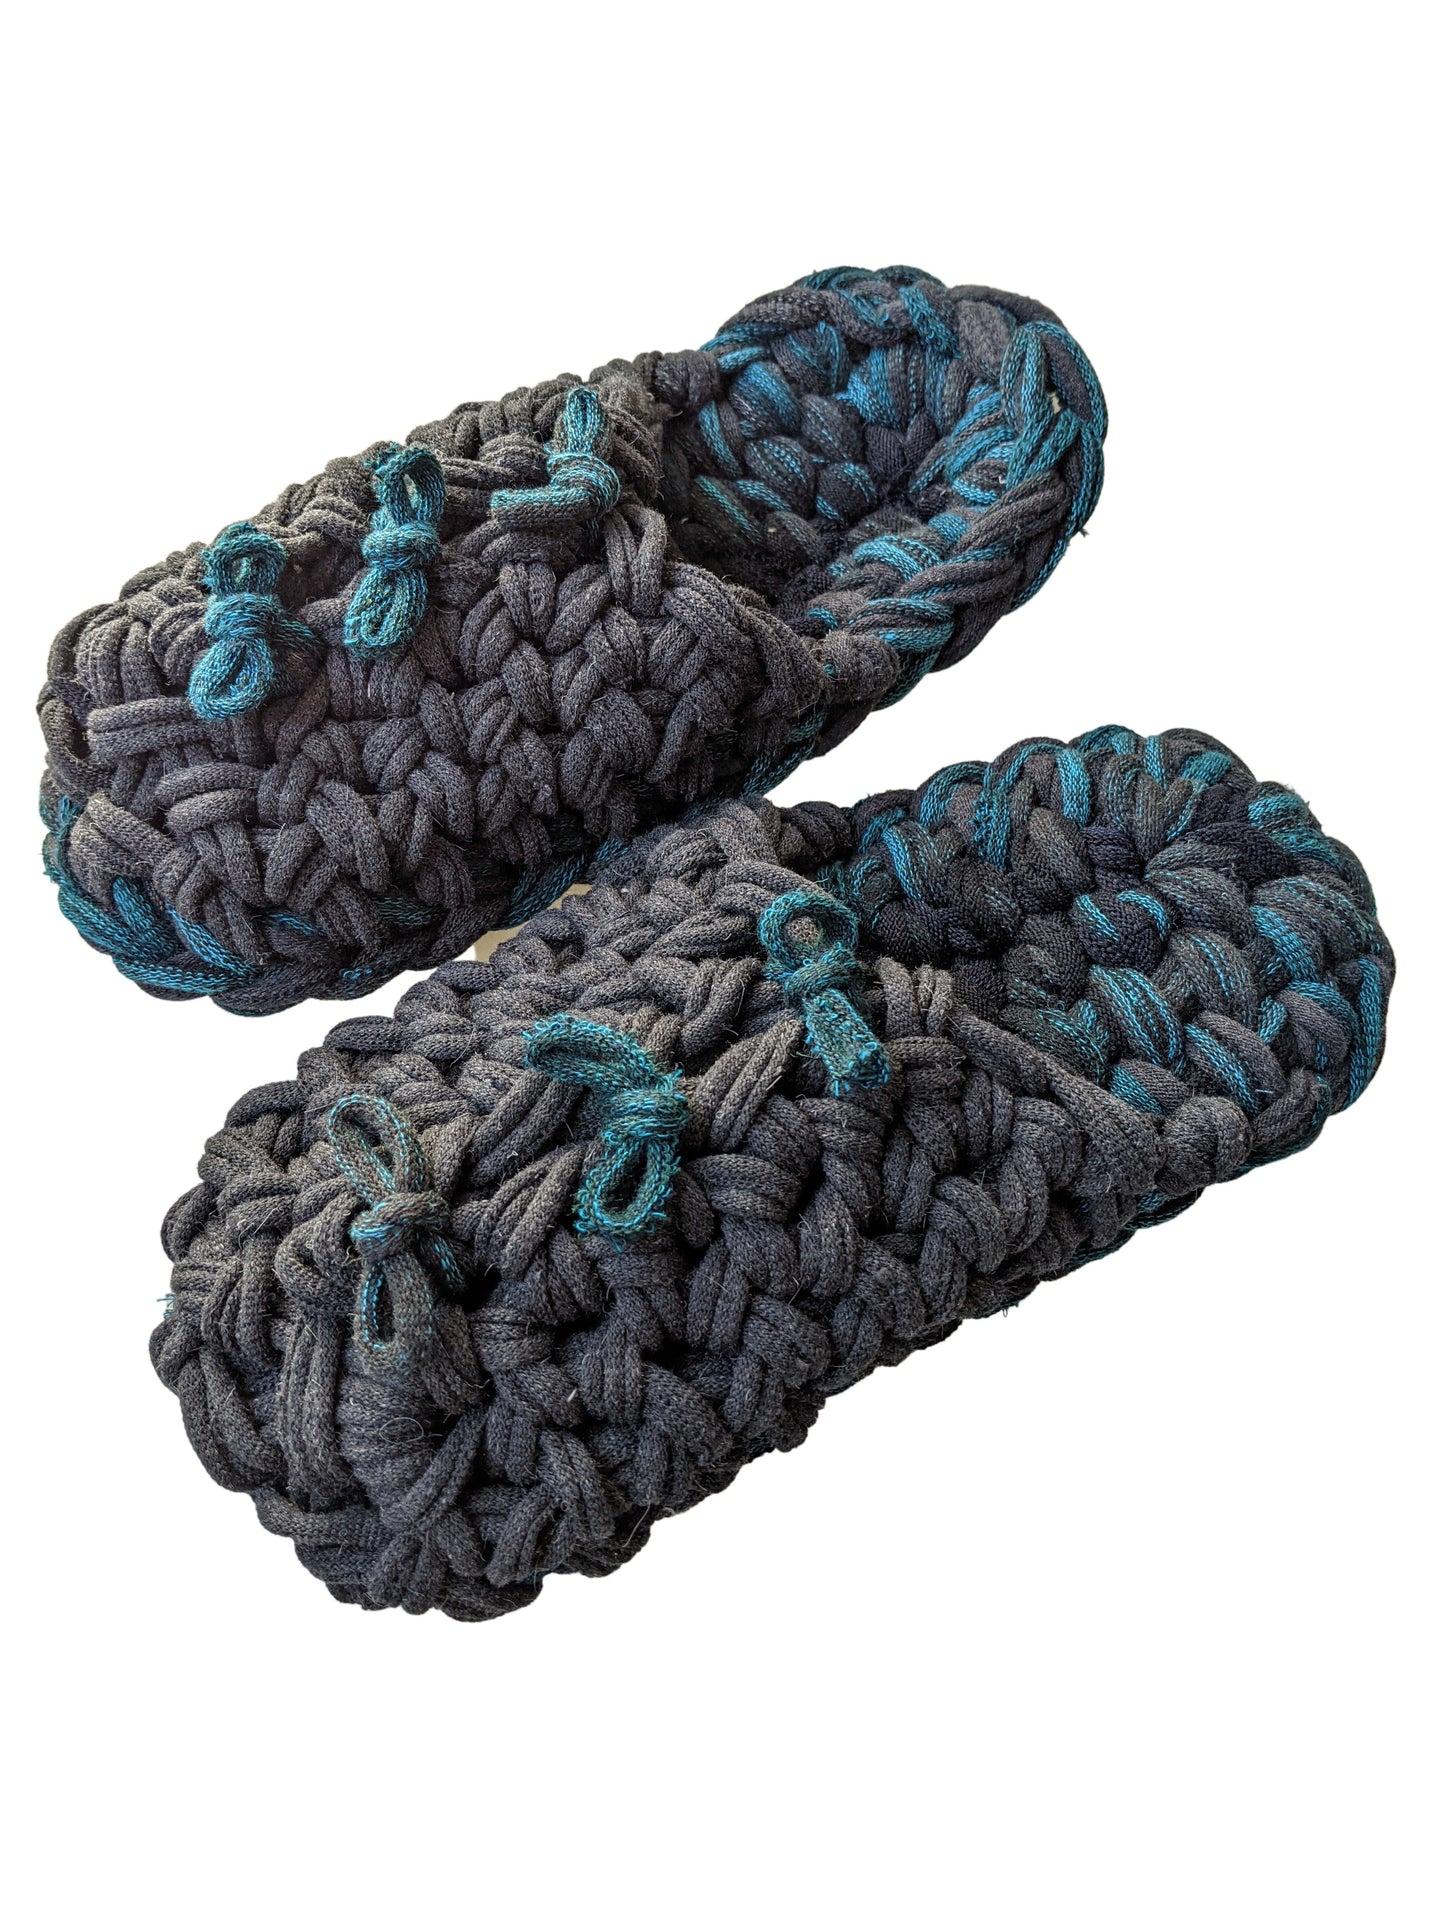 XL | Knit upcycle slippers 2021-XL12 [XL]